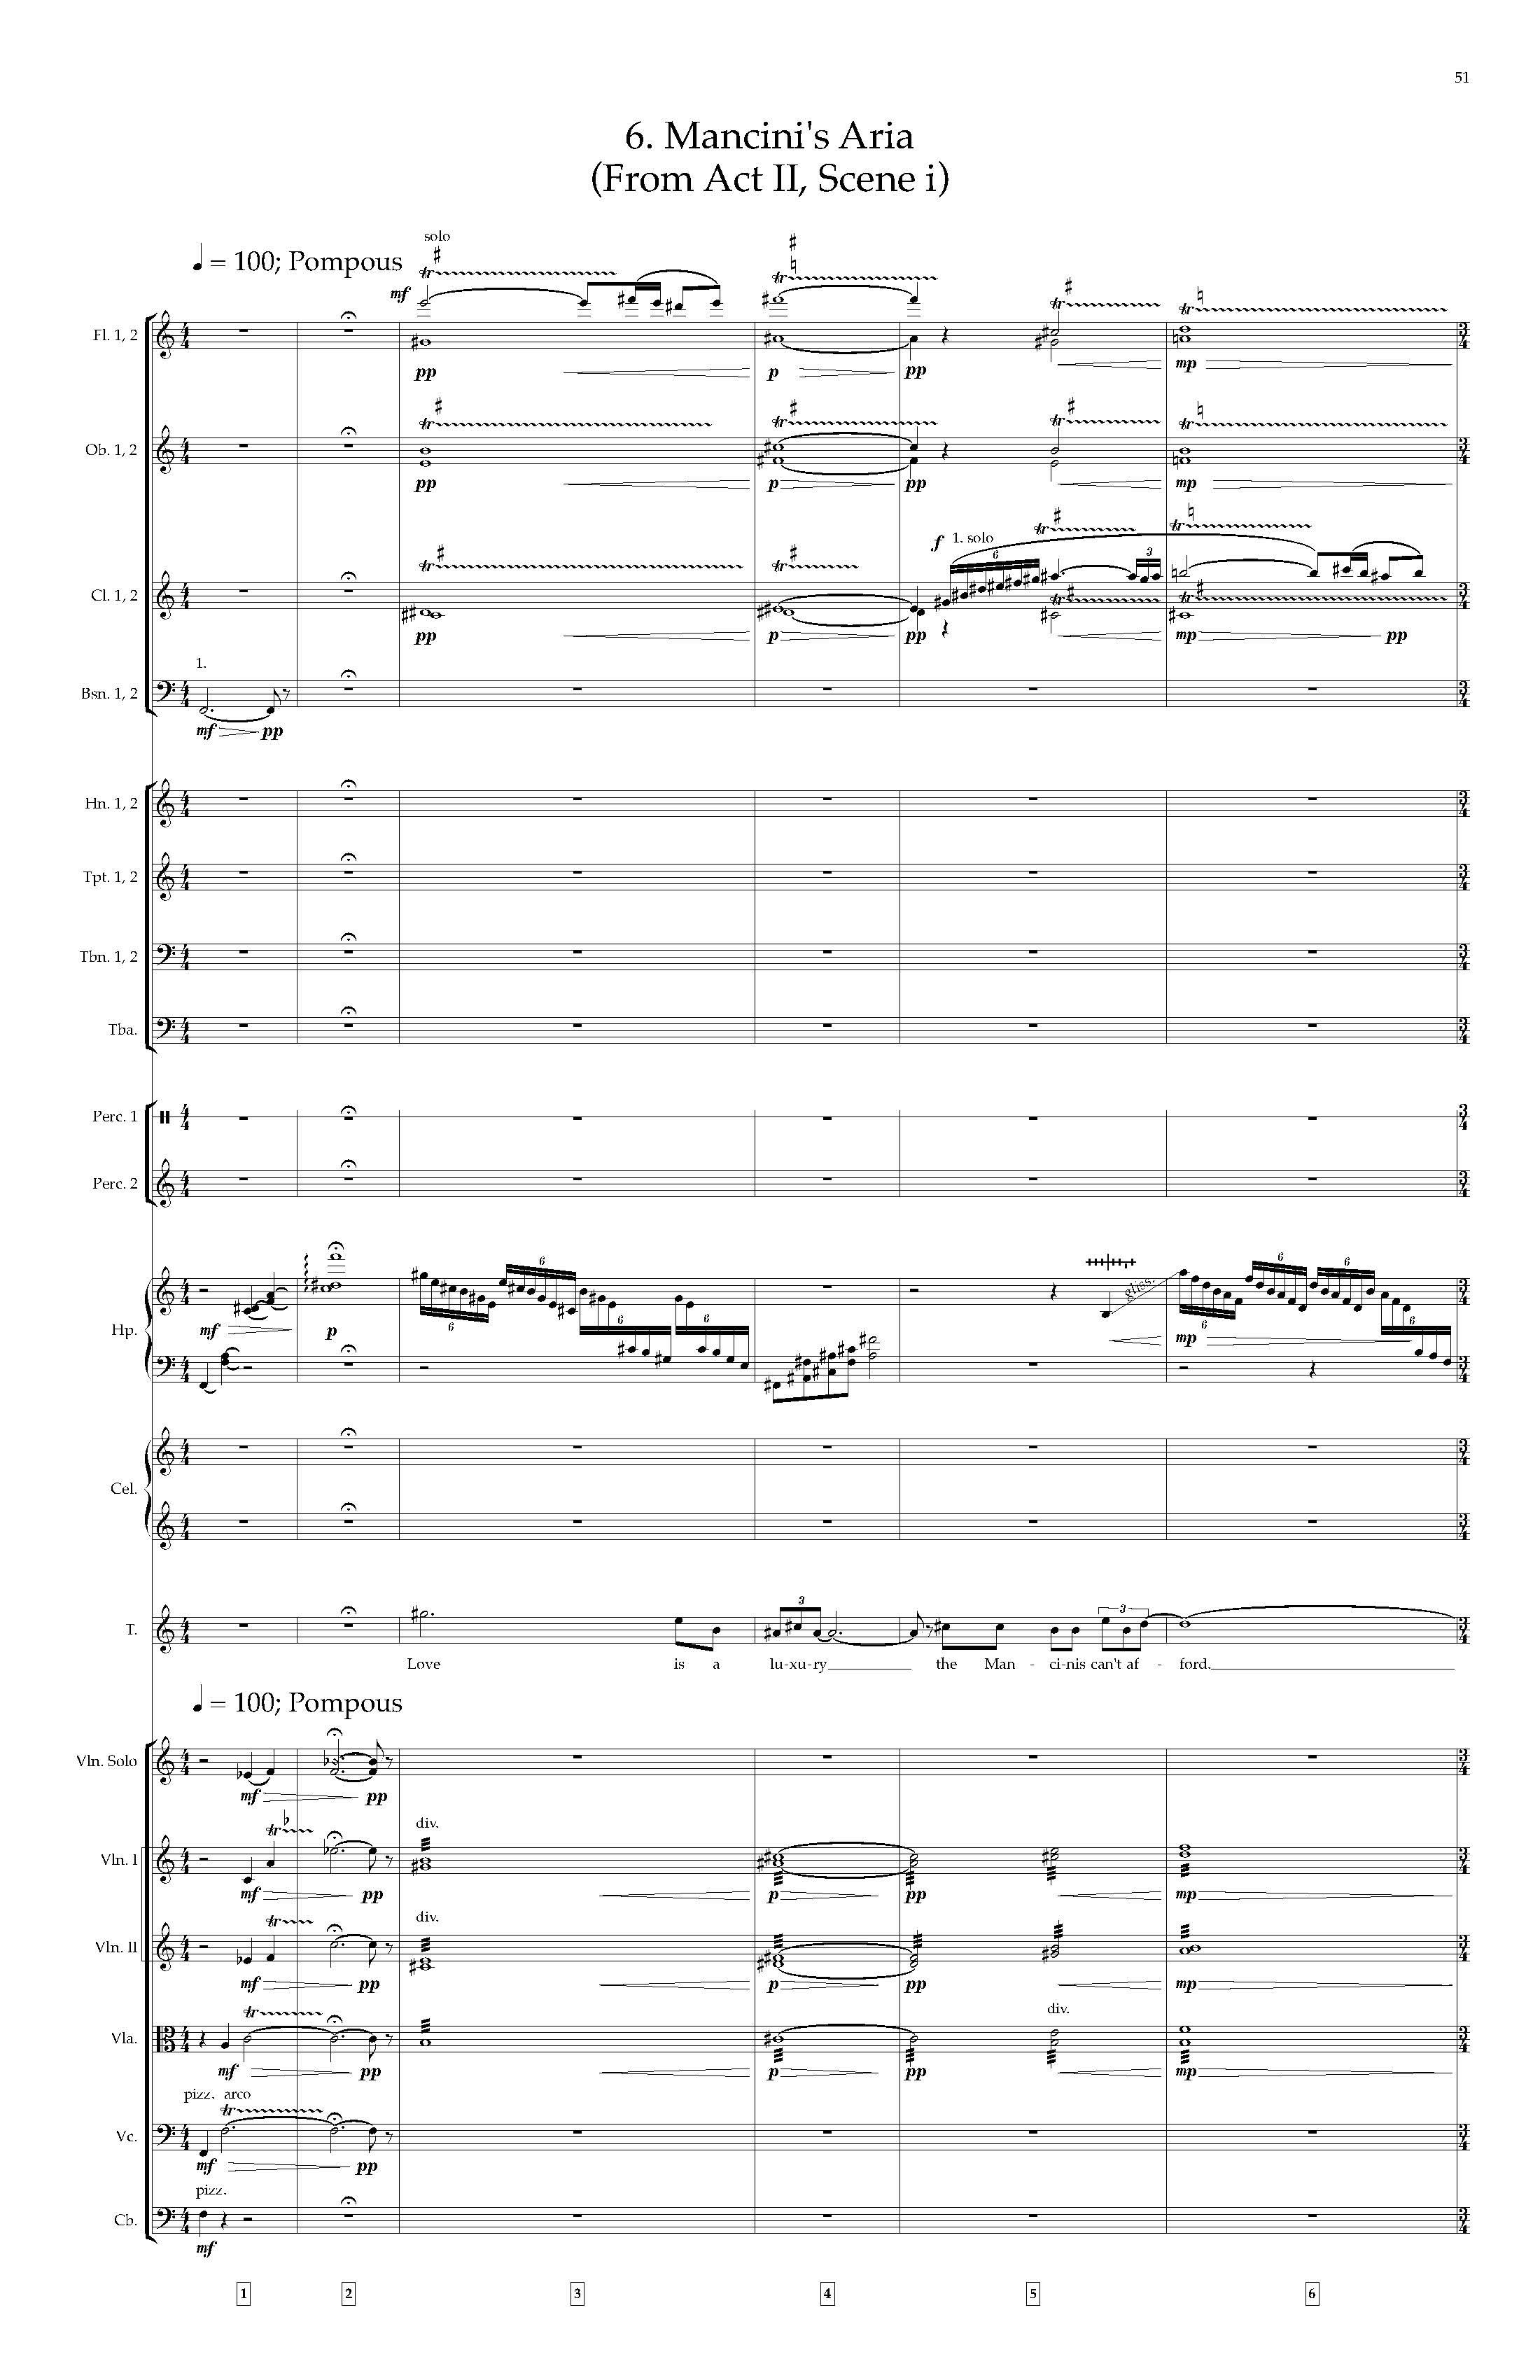 Arias and Interludes from HWGS - Complete Score_Page_57.jpg